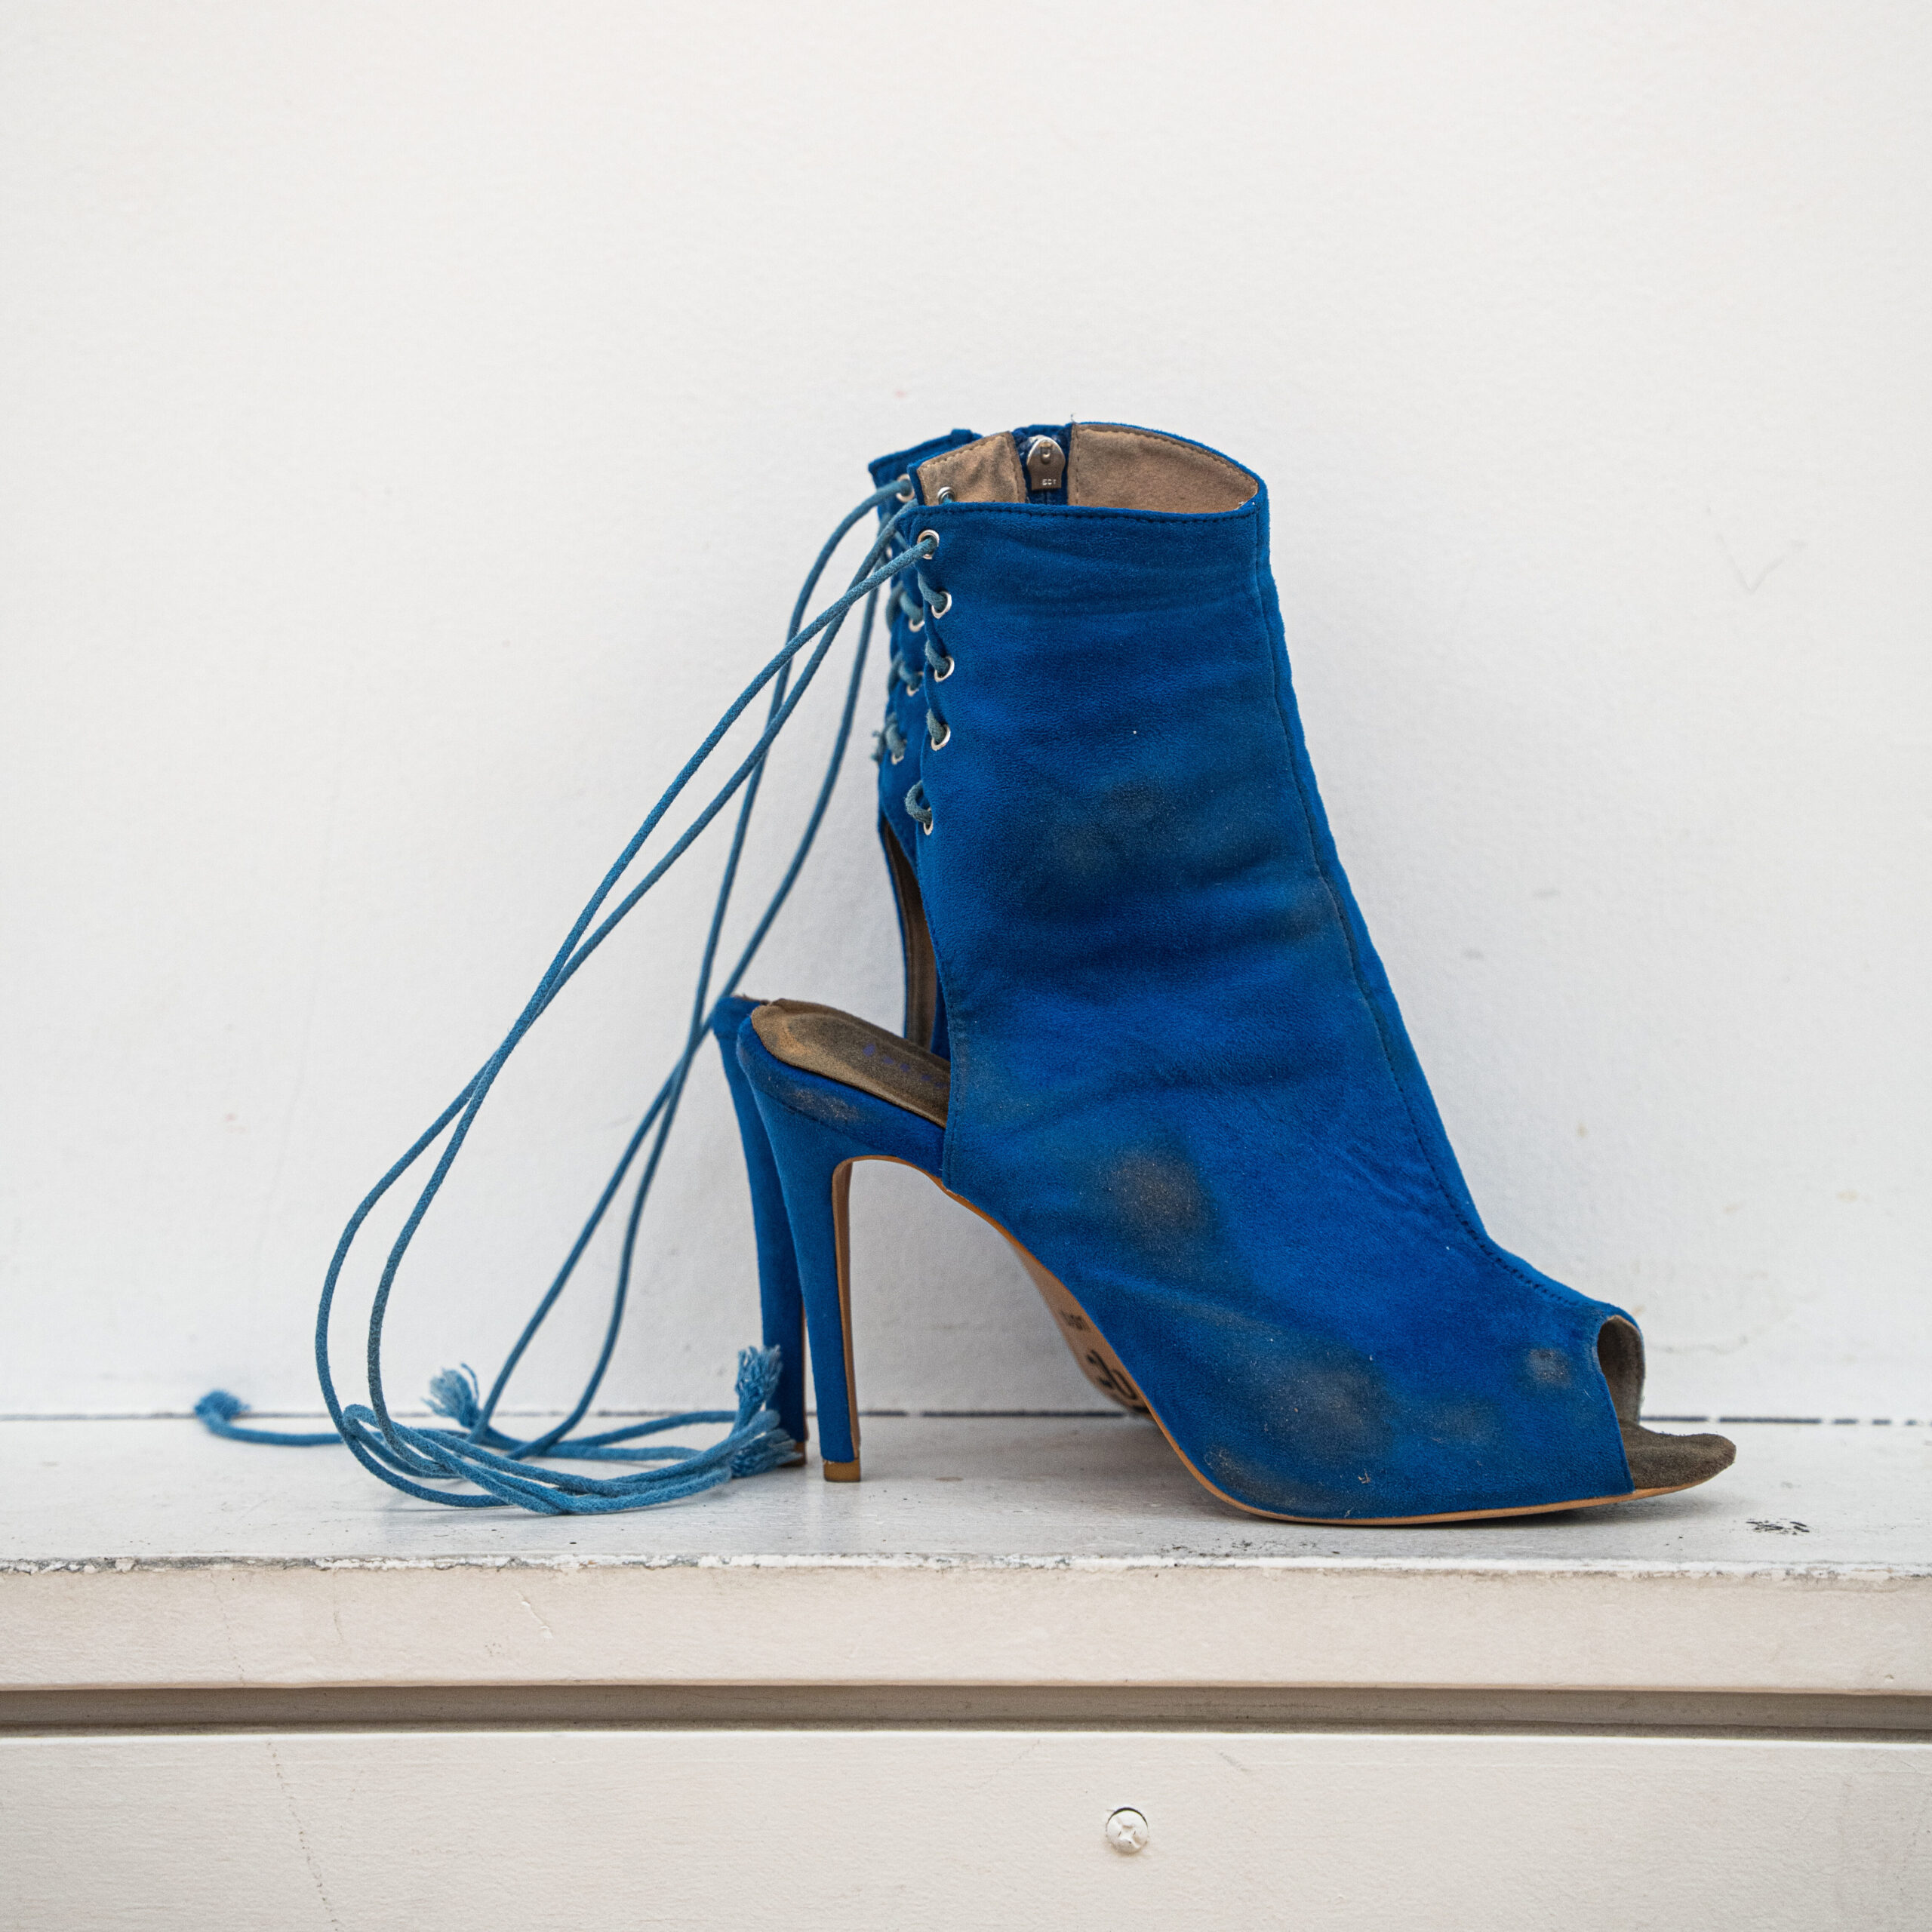 a blue high heel with a lace up back